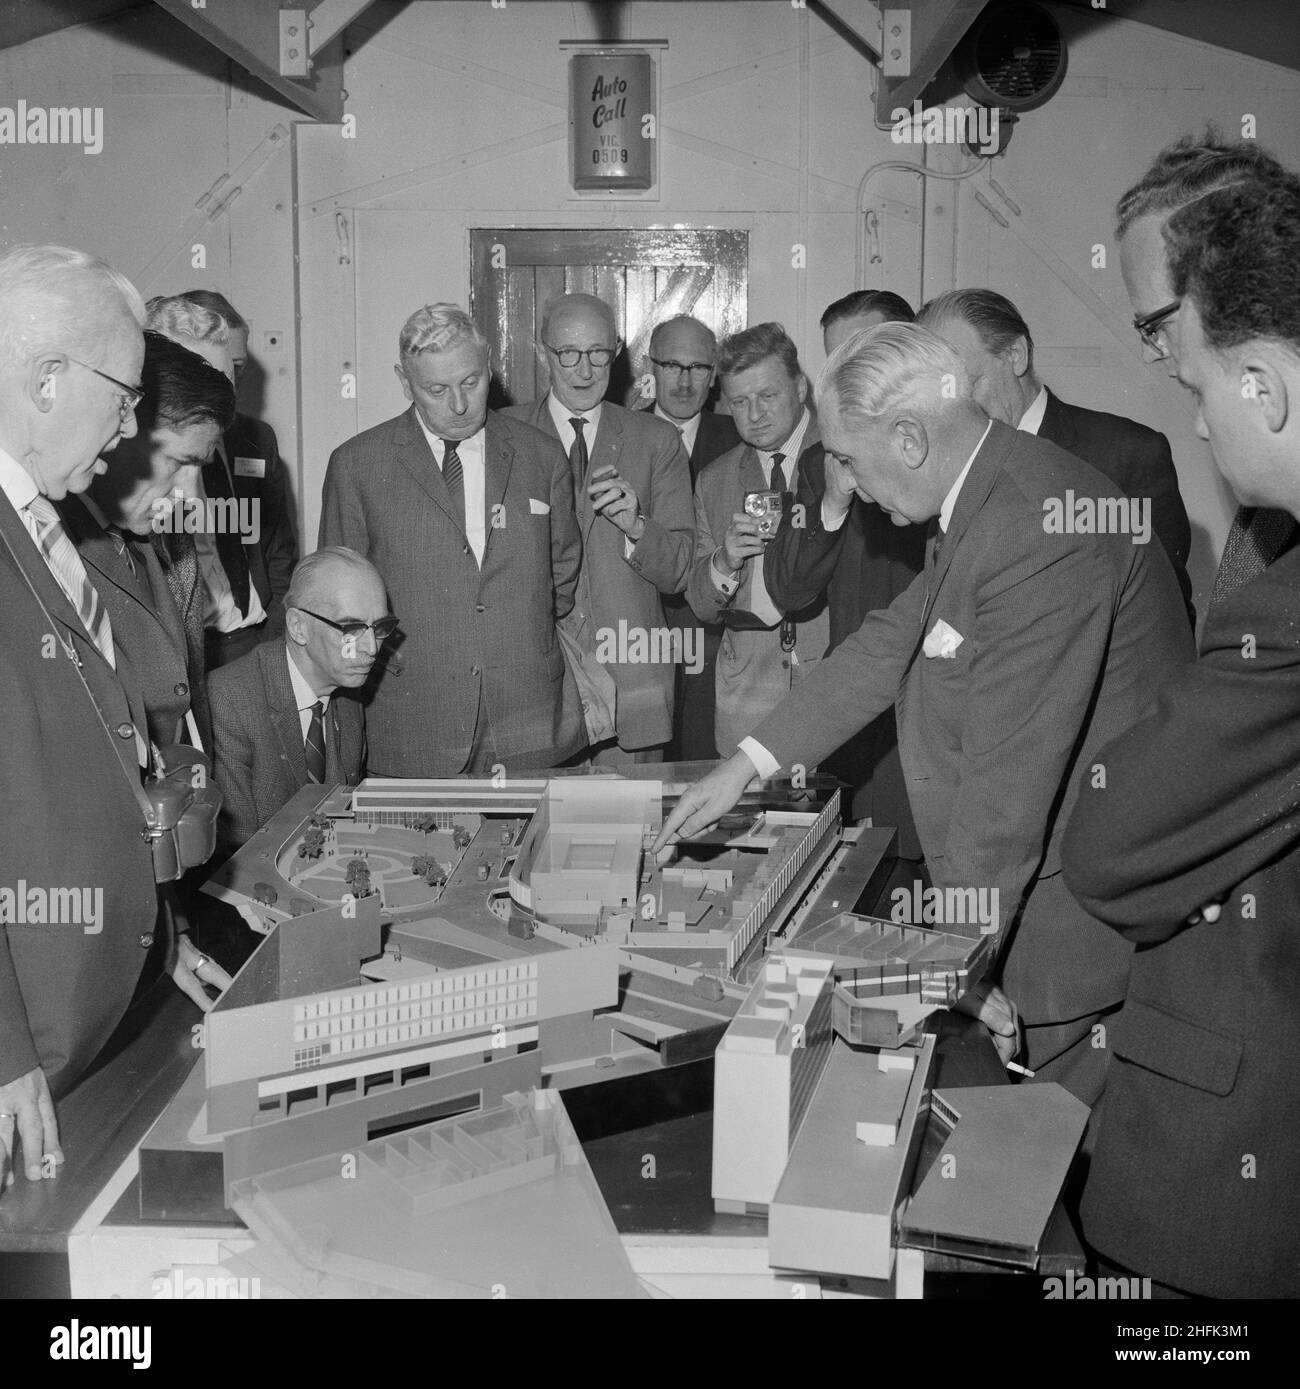 Bull Ring Centre, Birmingham, 02/07/1963. A group of councillors from Utrecht, Holland, being shown an architectural model of the Bull Ring Centre during a visit to the site. On Tuesday 2nd July 1963, 11 members of the City Council of Utrecht, Holland, and 7 officers, including the Director of Public Works and City Surveyor, visited the Bull Ring development. The councillors spent the morning with the Birmingham Corporation at the Civic Centre, followed by a lunch with representatives of the Birmingham Corporation and the Laing Development Company. In the afternoon, the councillors toured the Stock Photo